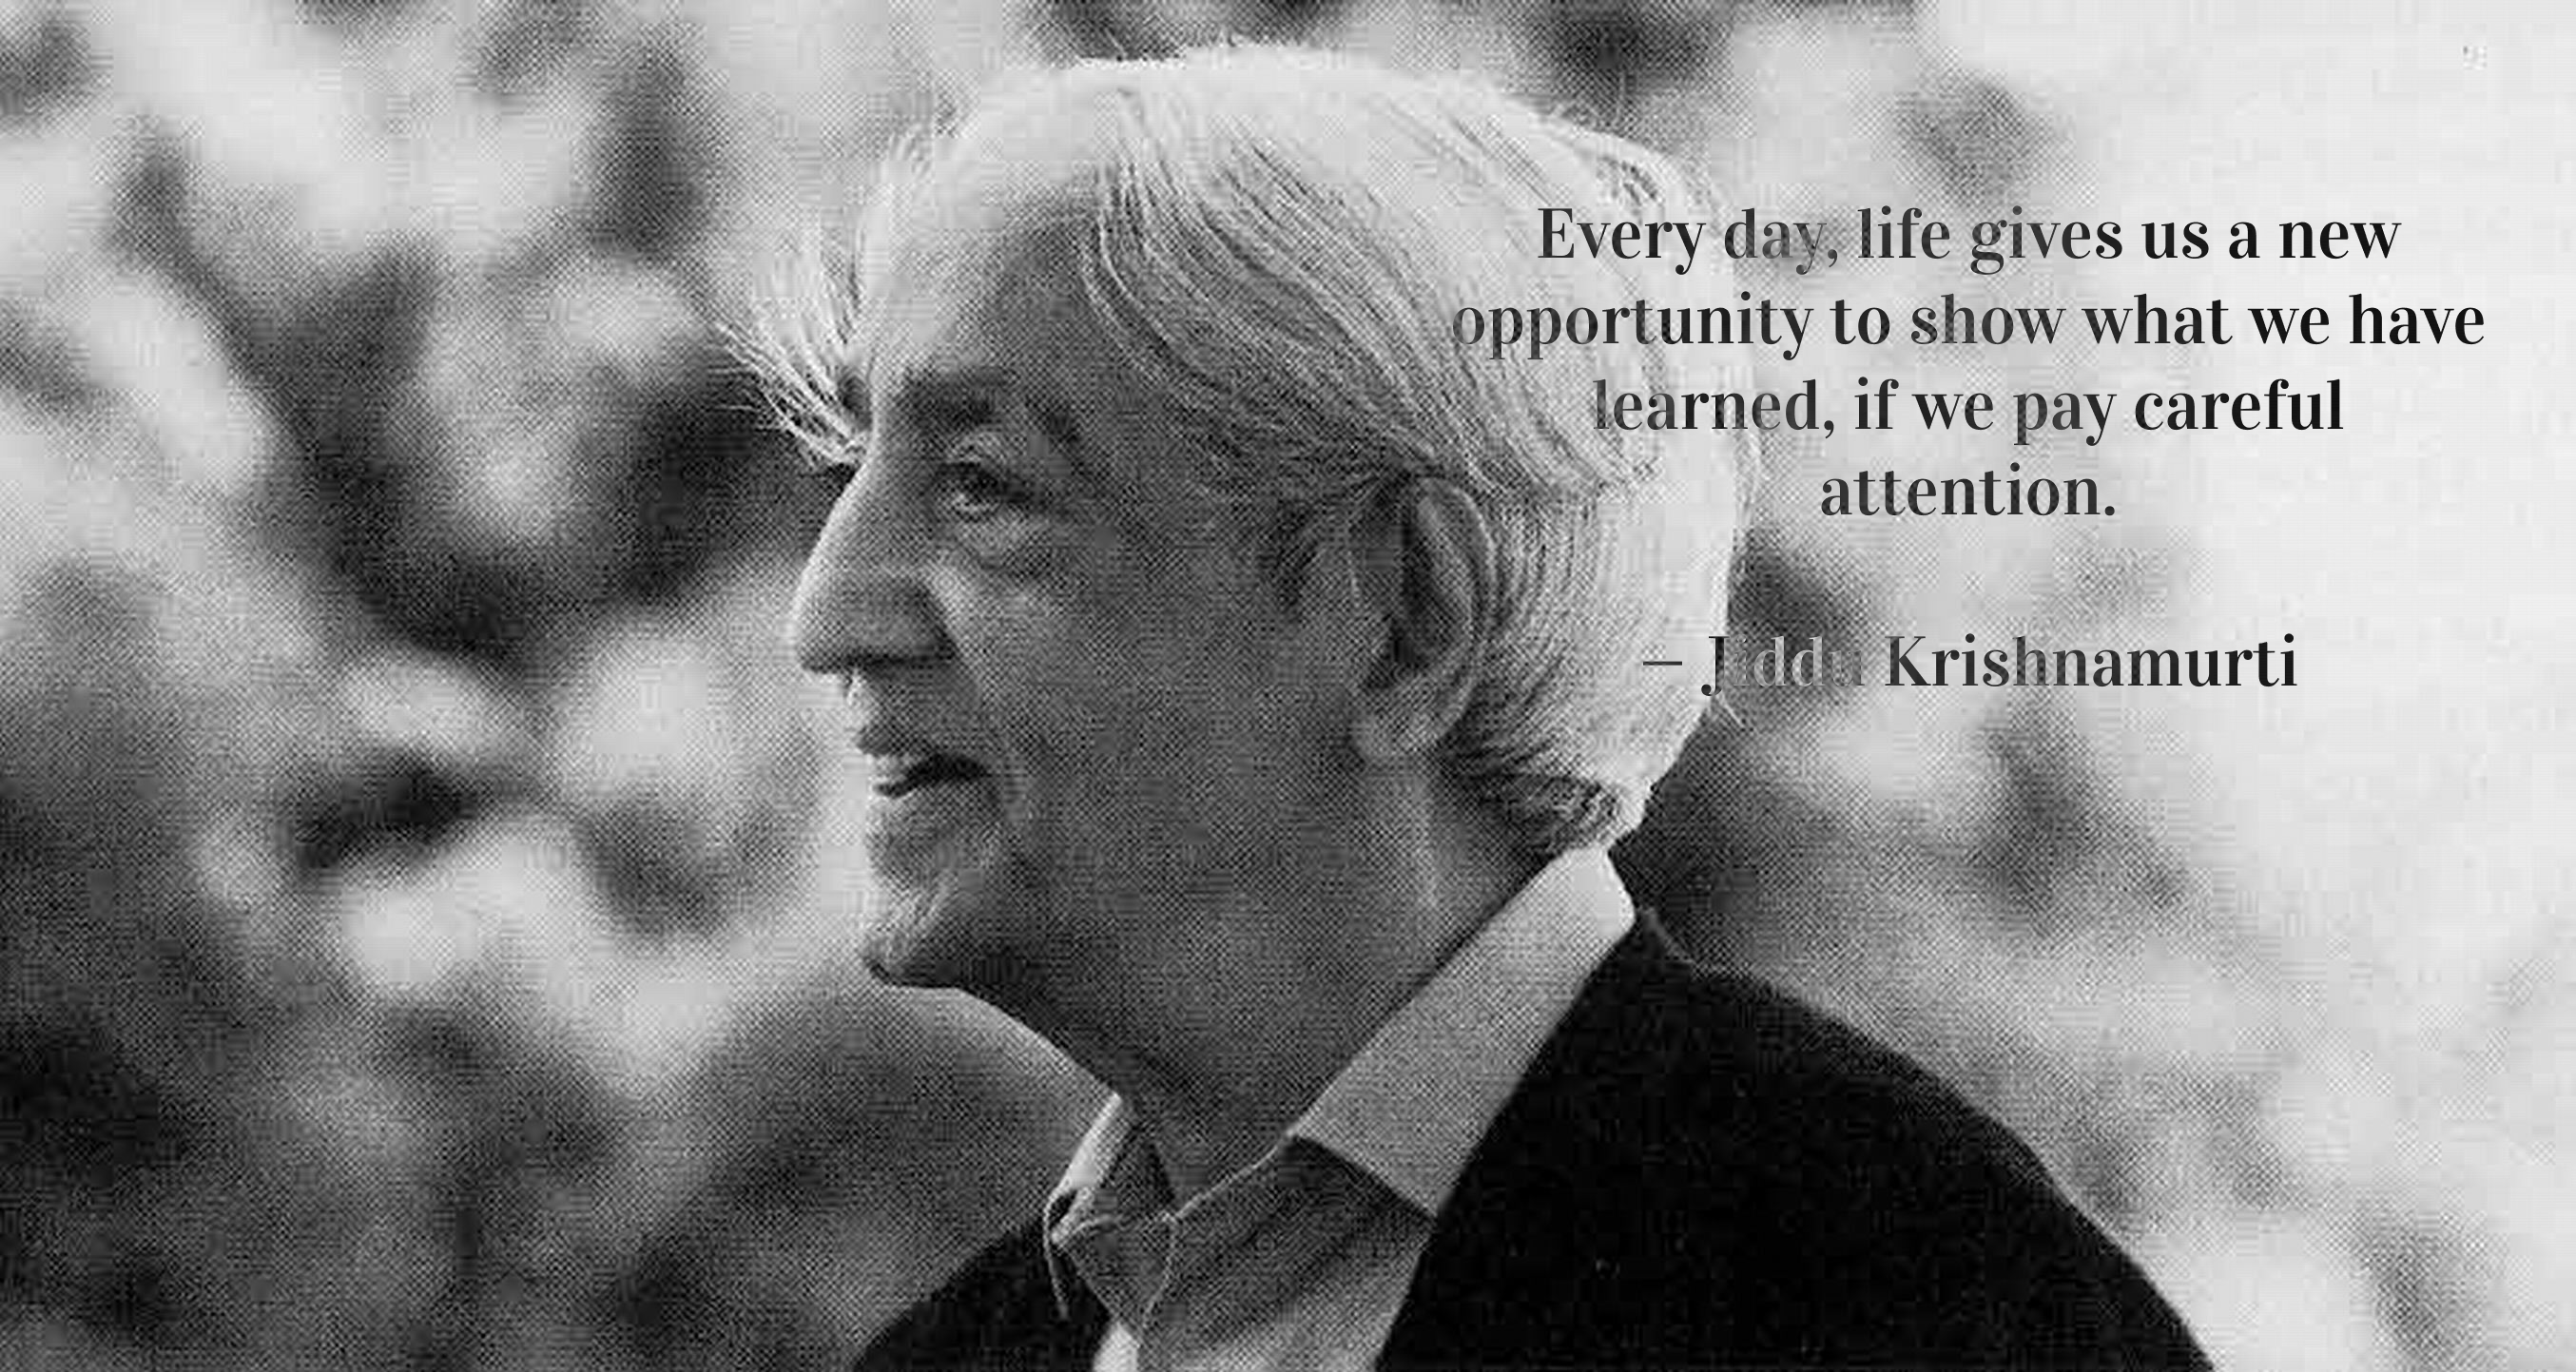 alt text for an image of Jiddu Krishnamurti and quote "Every day, life gives us a new opportunity to show what we have learned, if we pay careful attention"